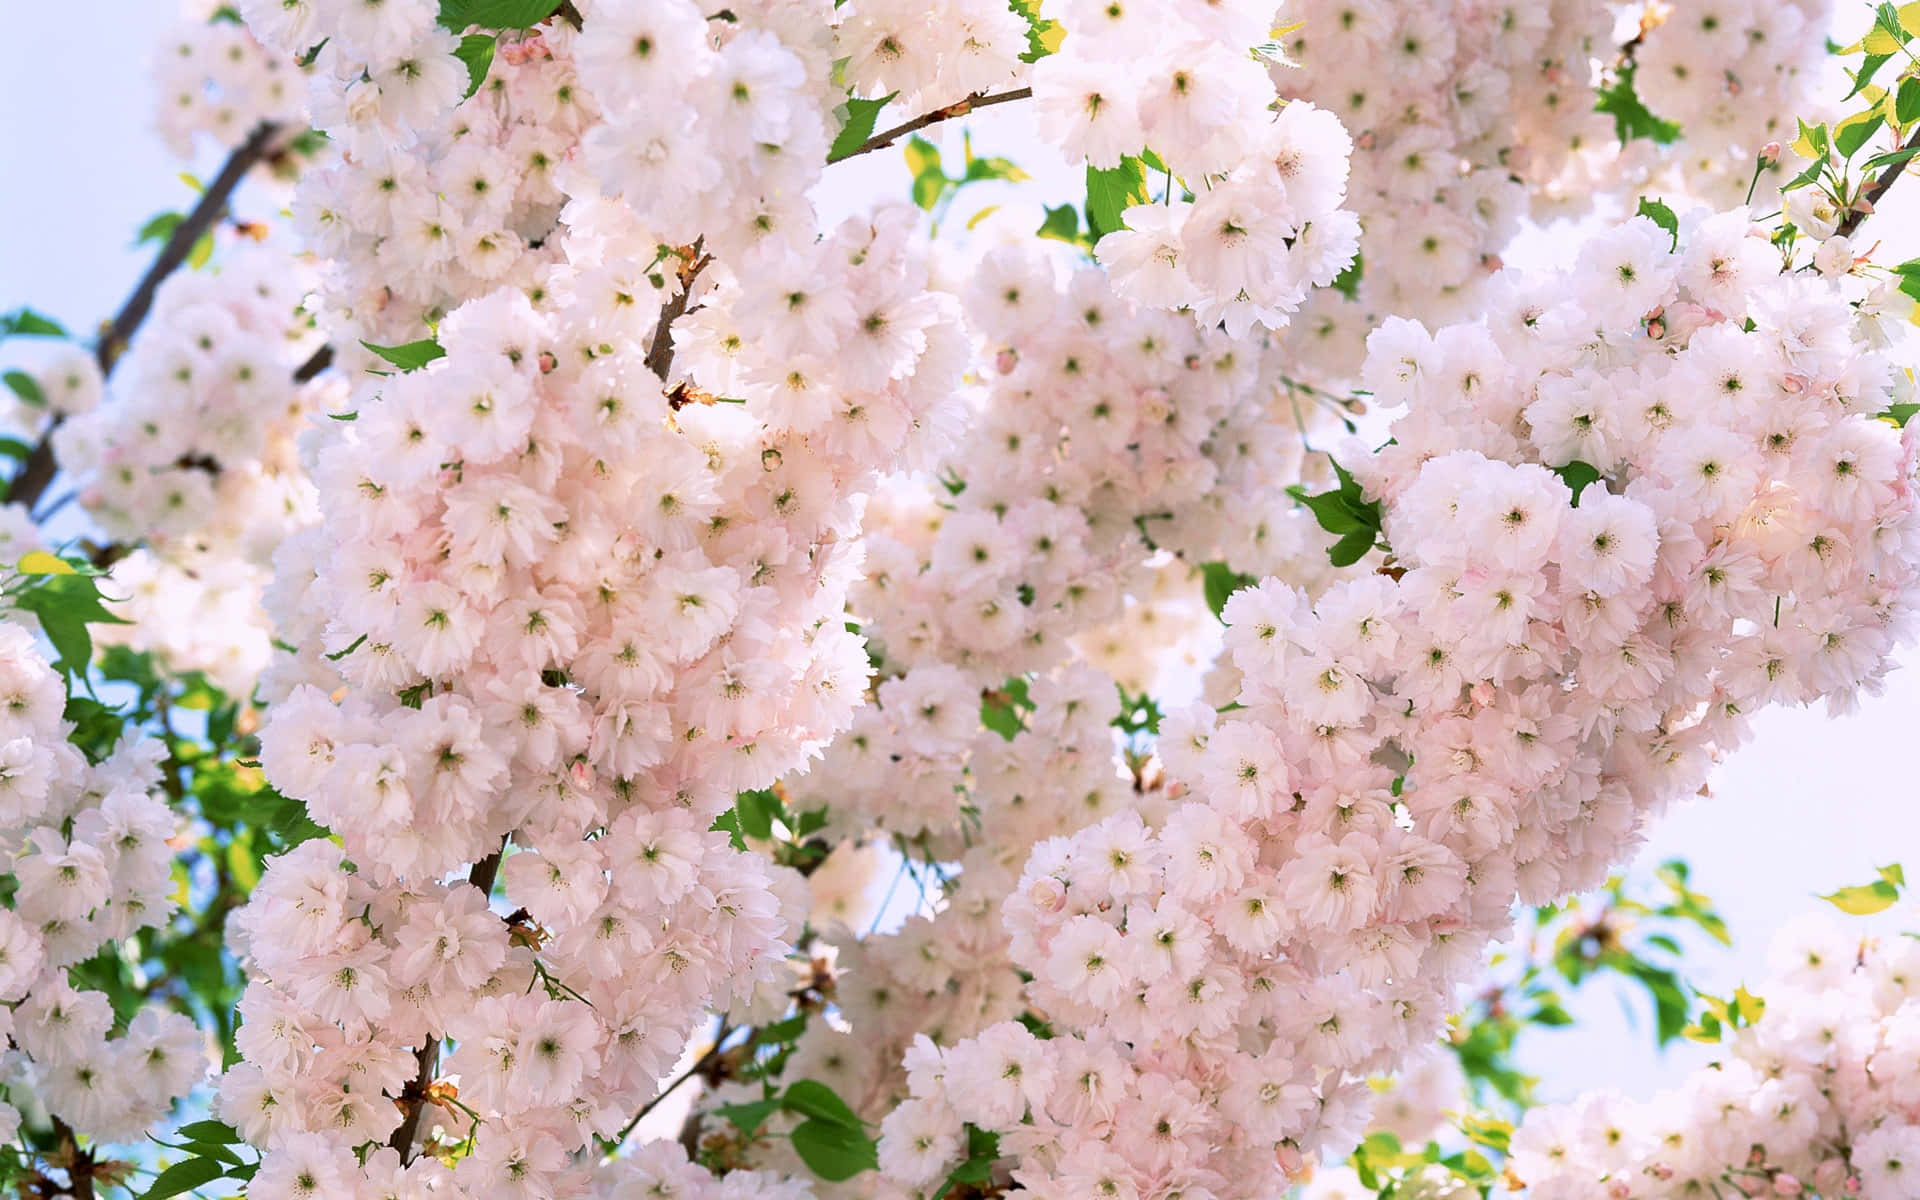 Captivating Floral Bliss on Tumblr